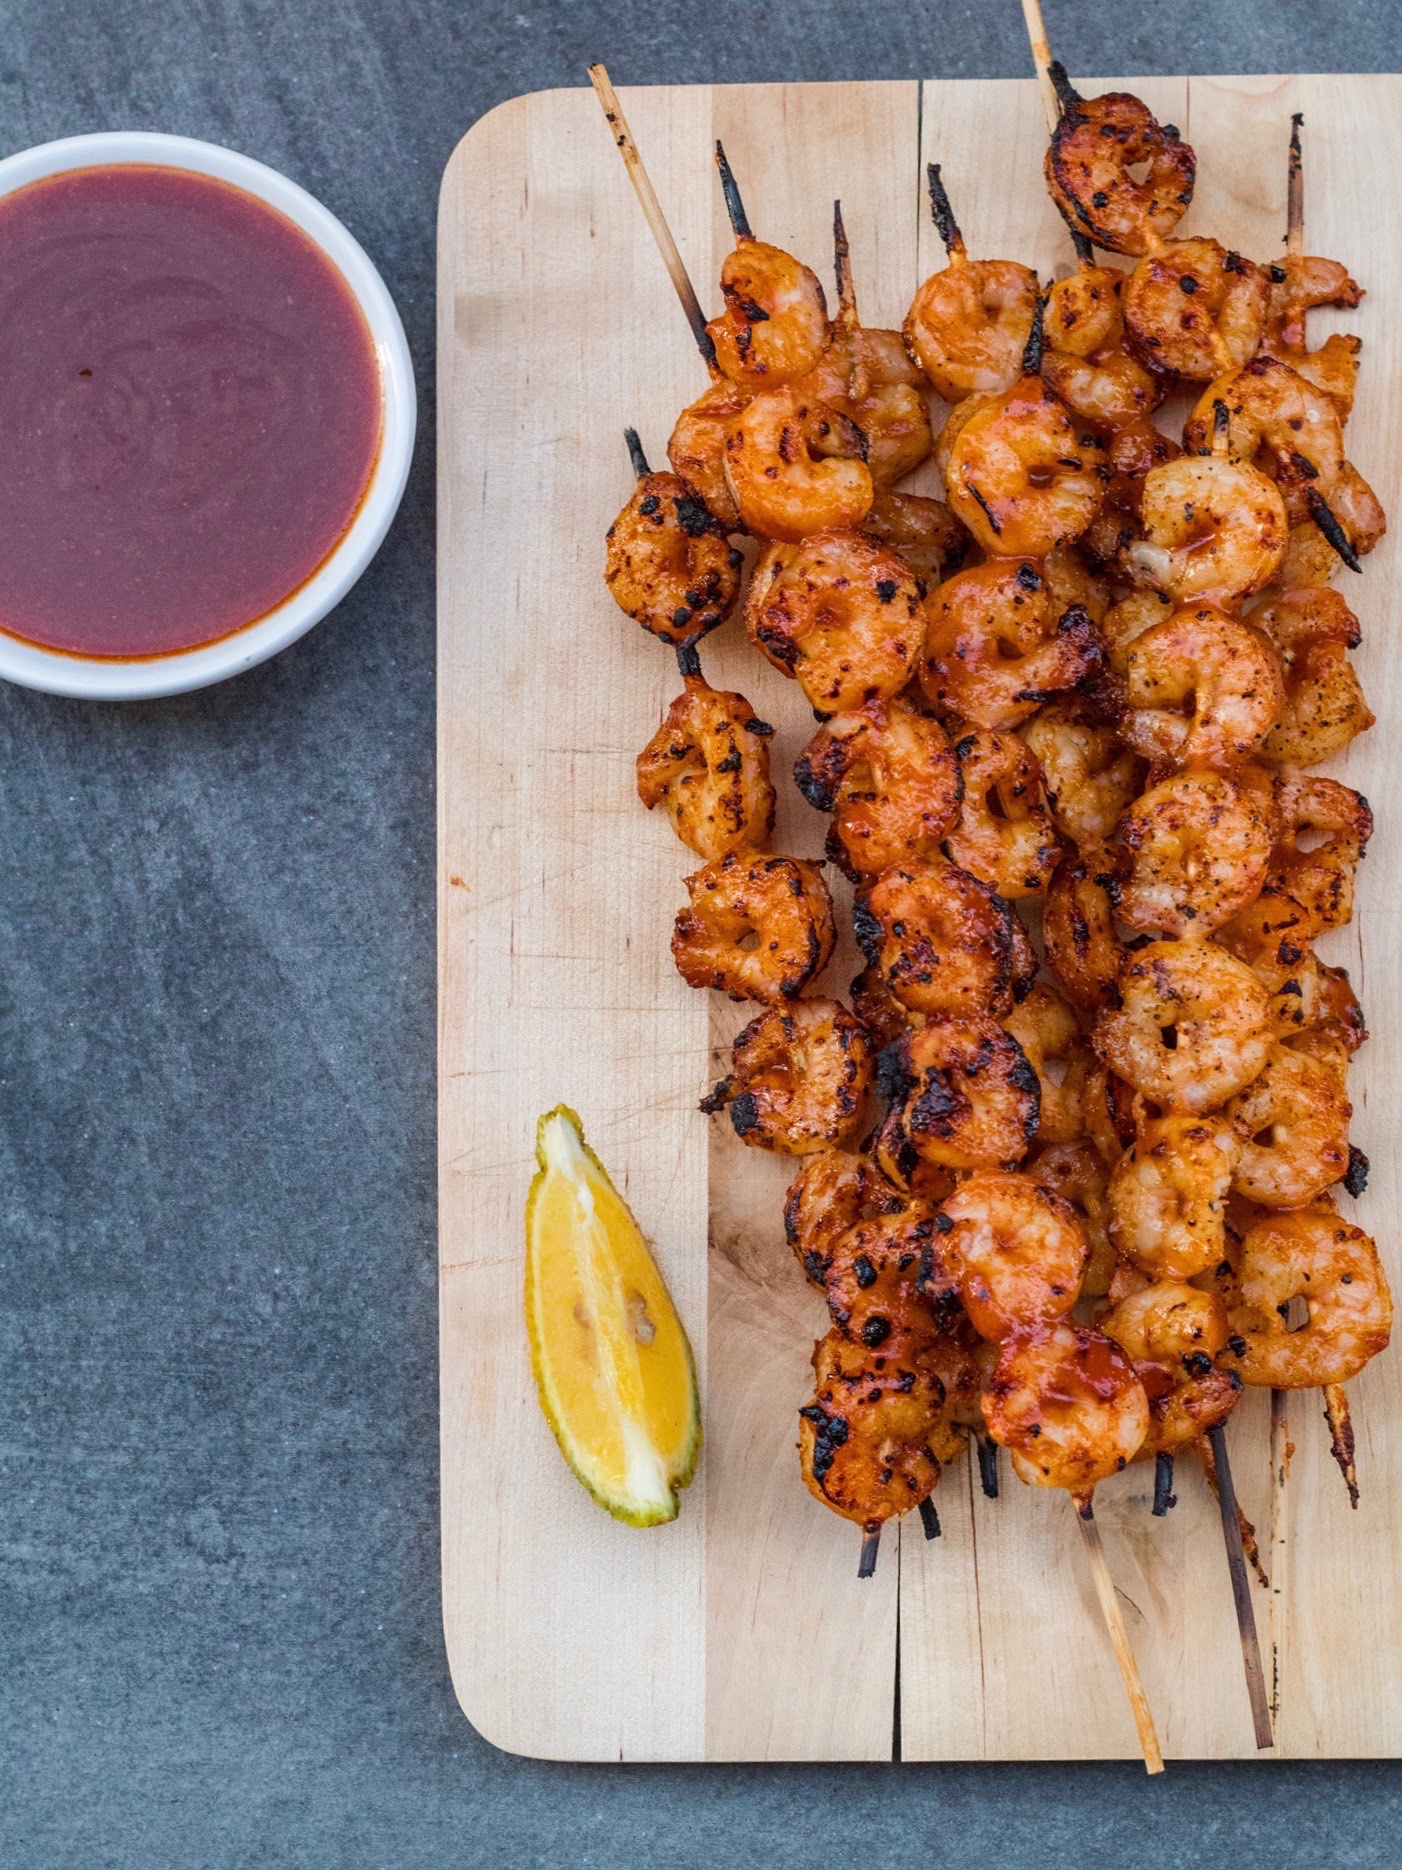 Grilled shrimp and sauce